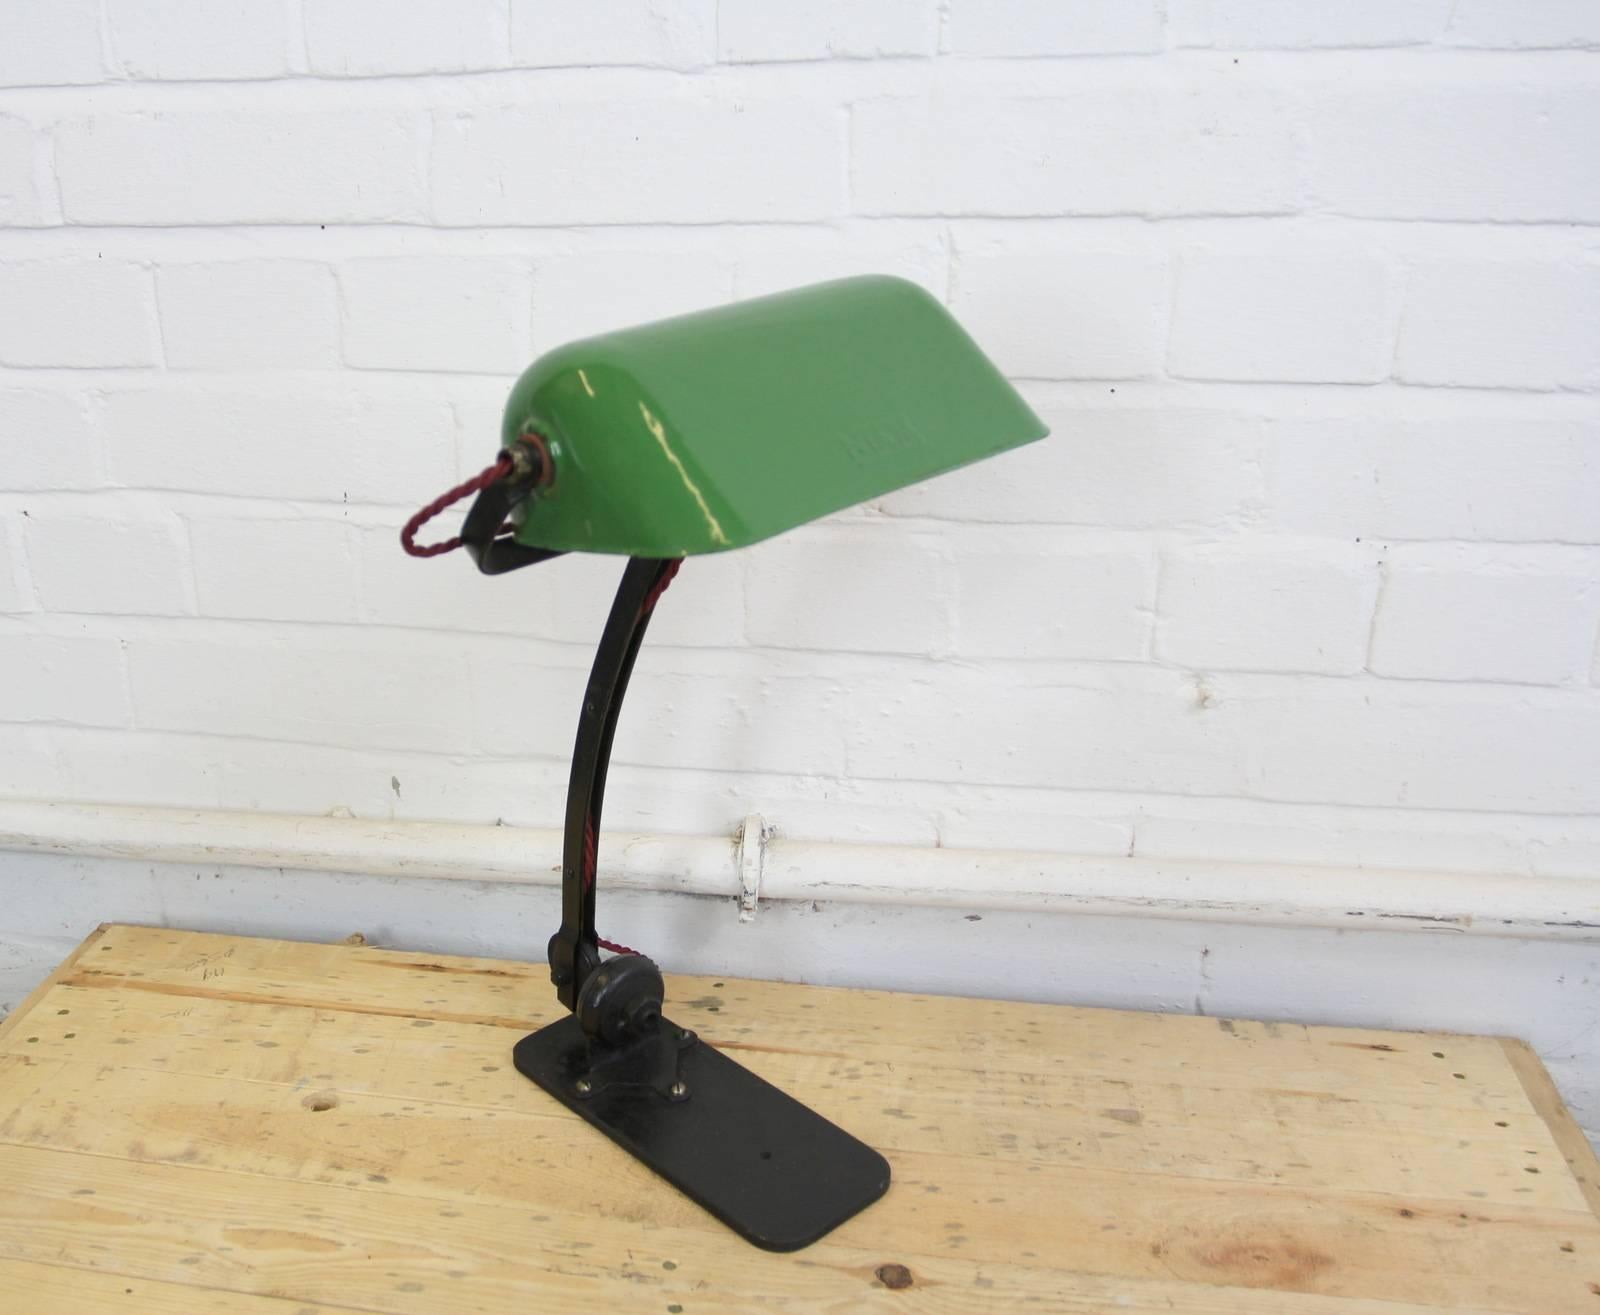 - Vitreous green enamel shade
- Embossed logo on the shade
- Double joint which allows the lamp to be adjusted into many angles
- Takes B22 fitting bulbs
- Would have originally been attached to an architects drawing board
- French, circa